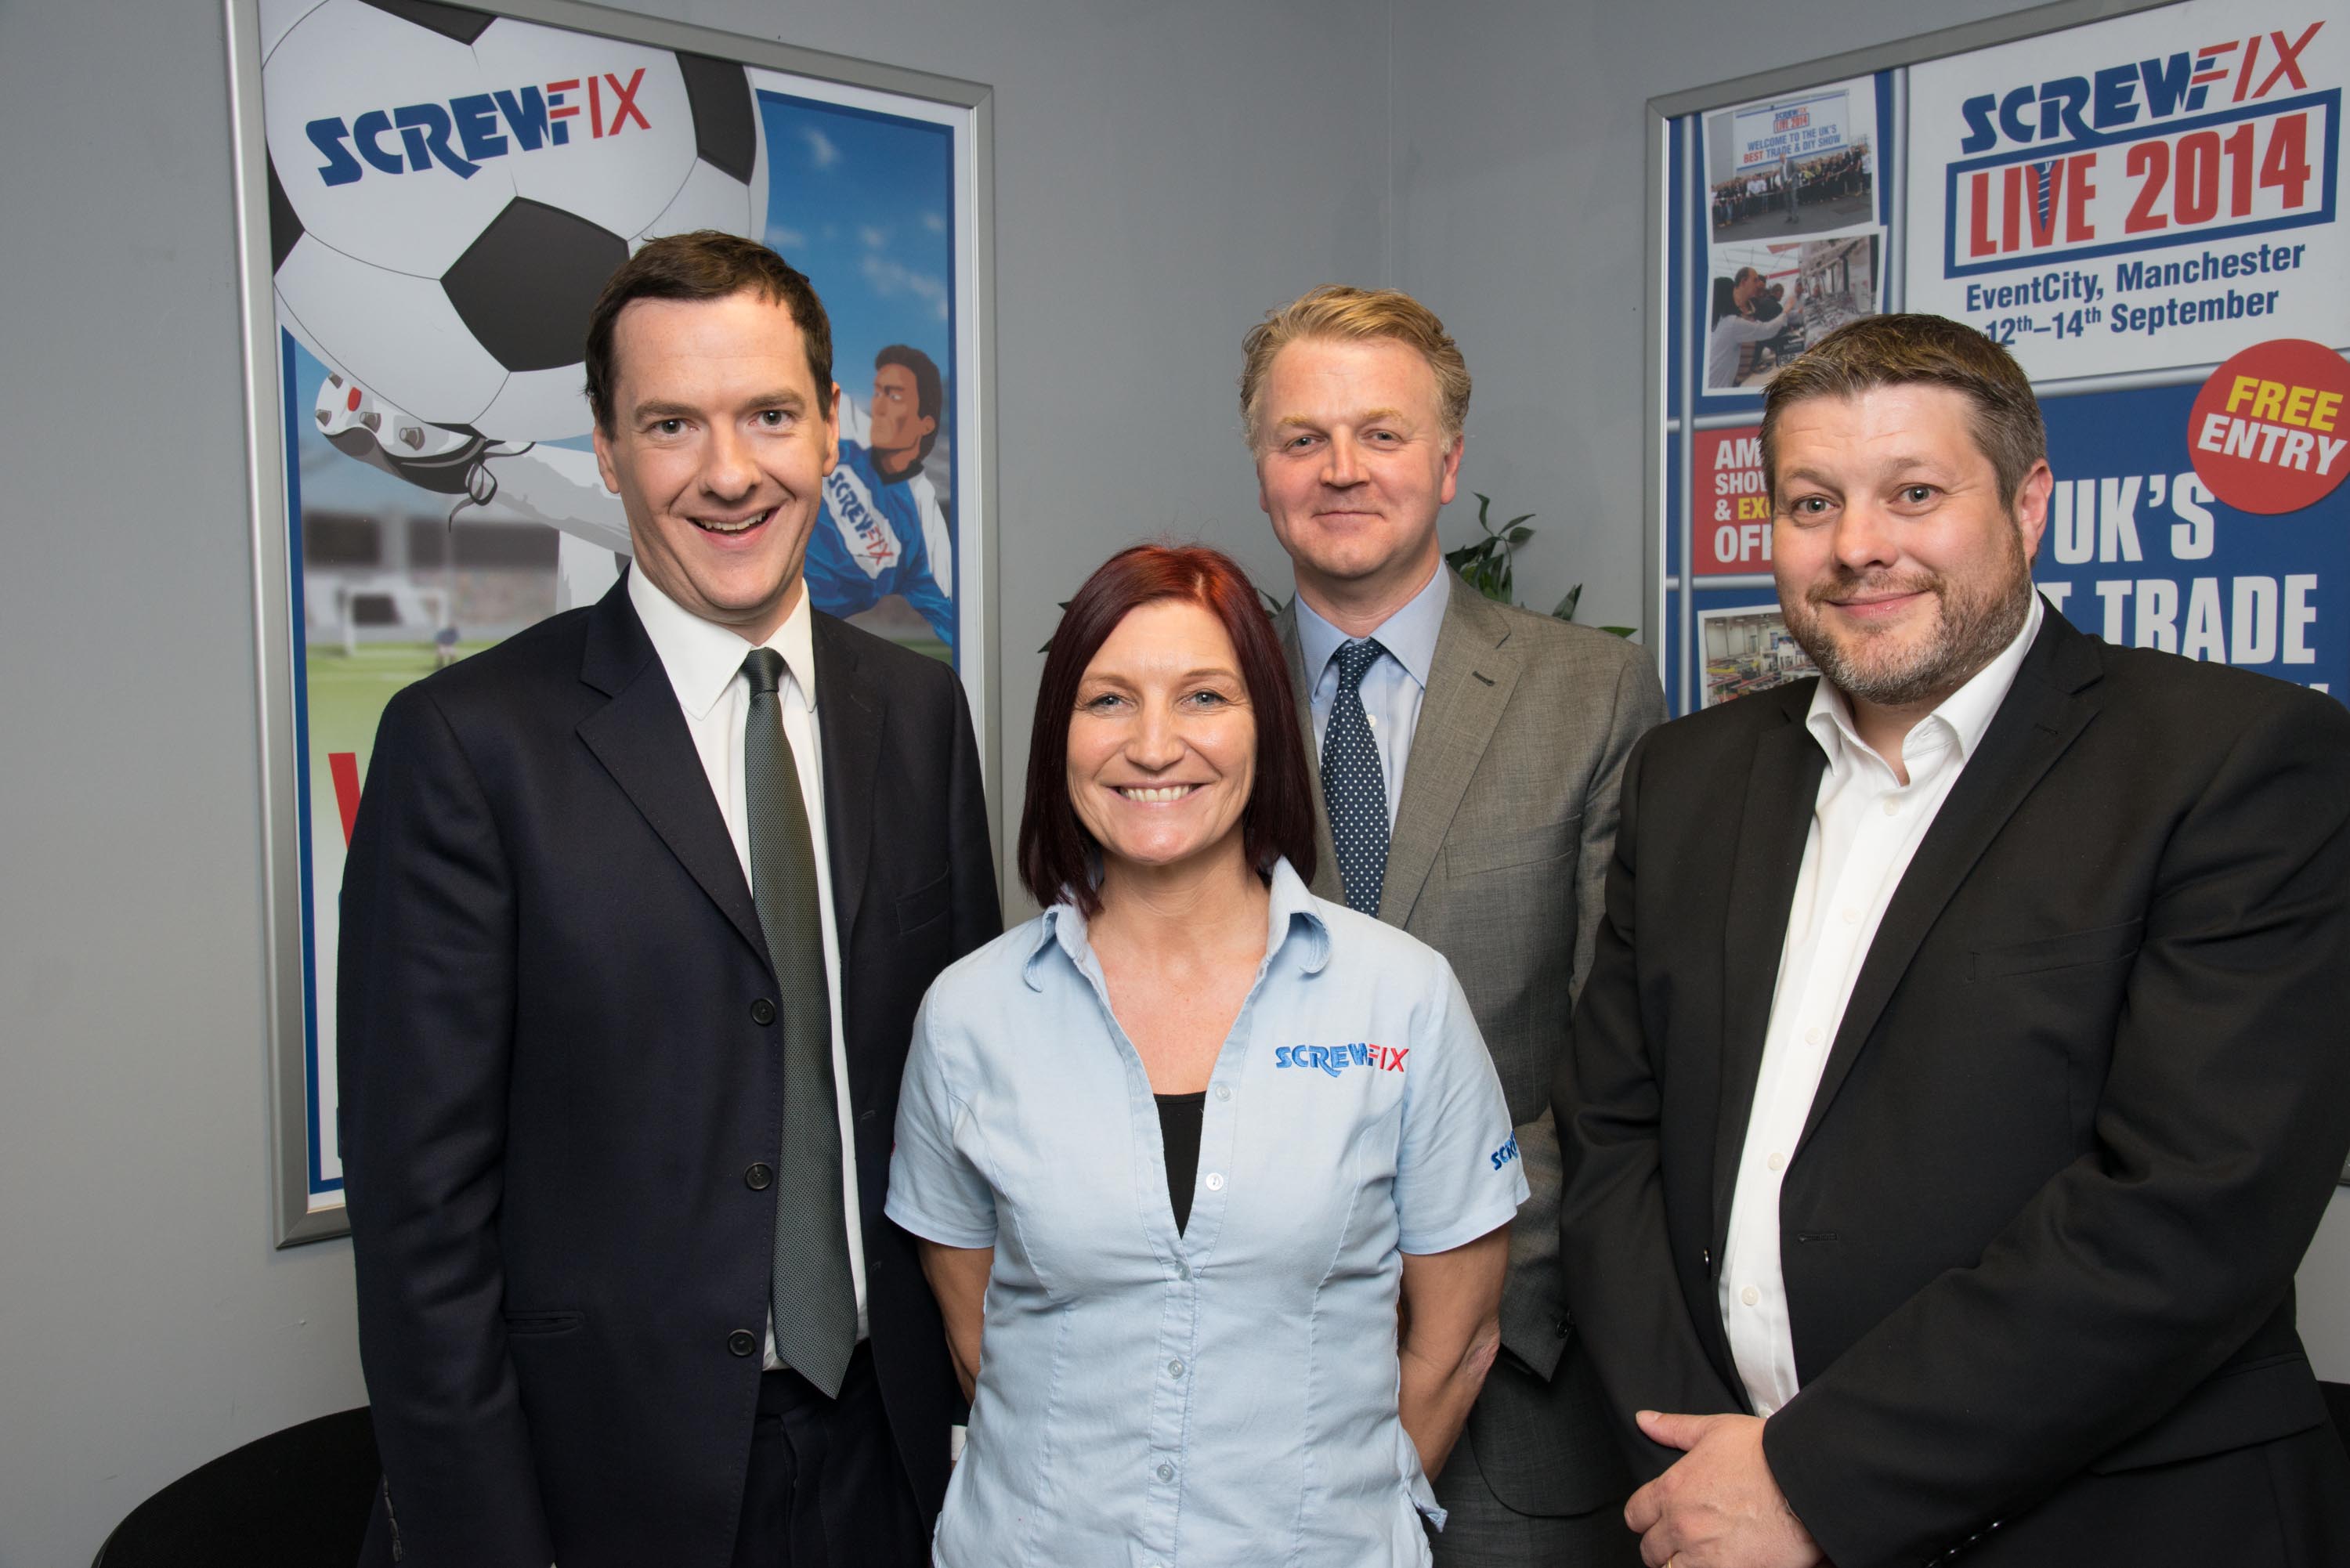 Chancellor of the Exchequer announces Screwfix expansion